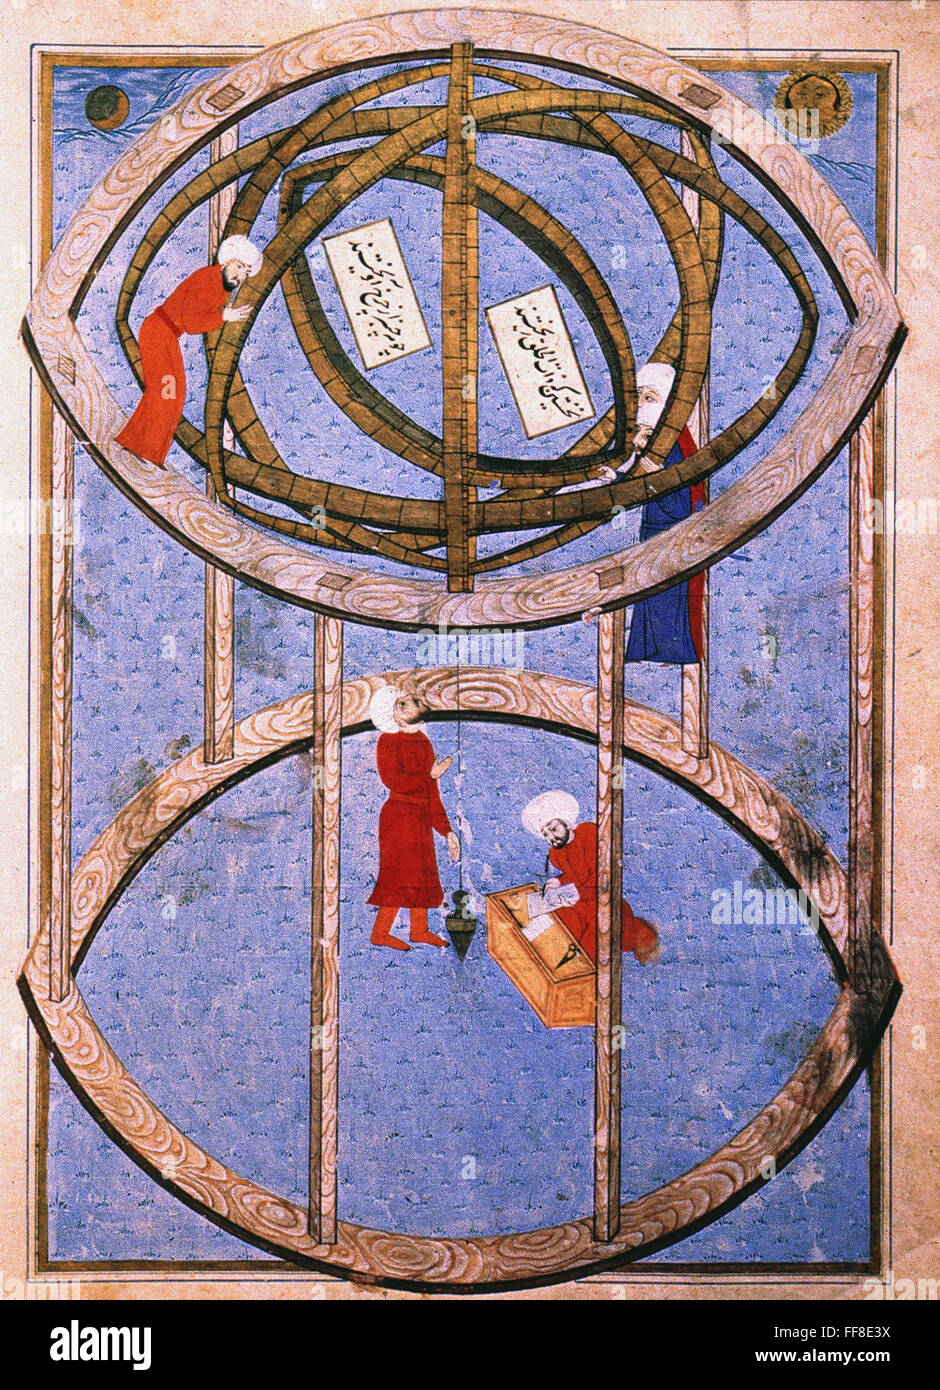 ASTRONOMERS /nwithin a giant armillary sphere: illumination from an Ottoman ms., late 16th century. Stock Photo